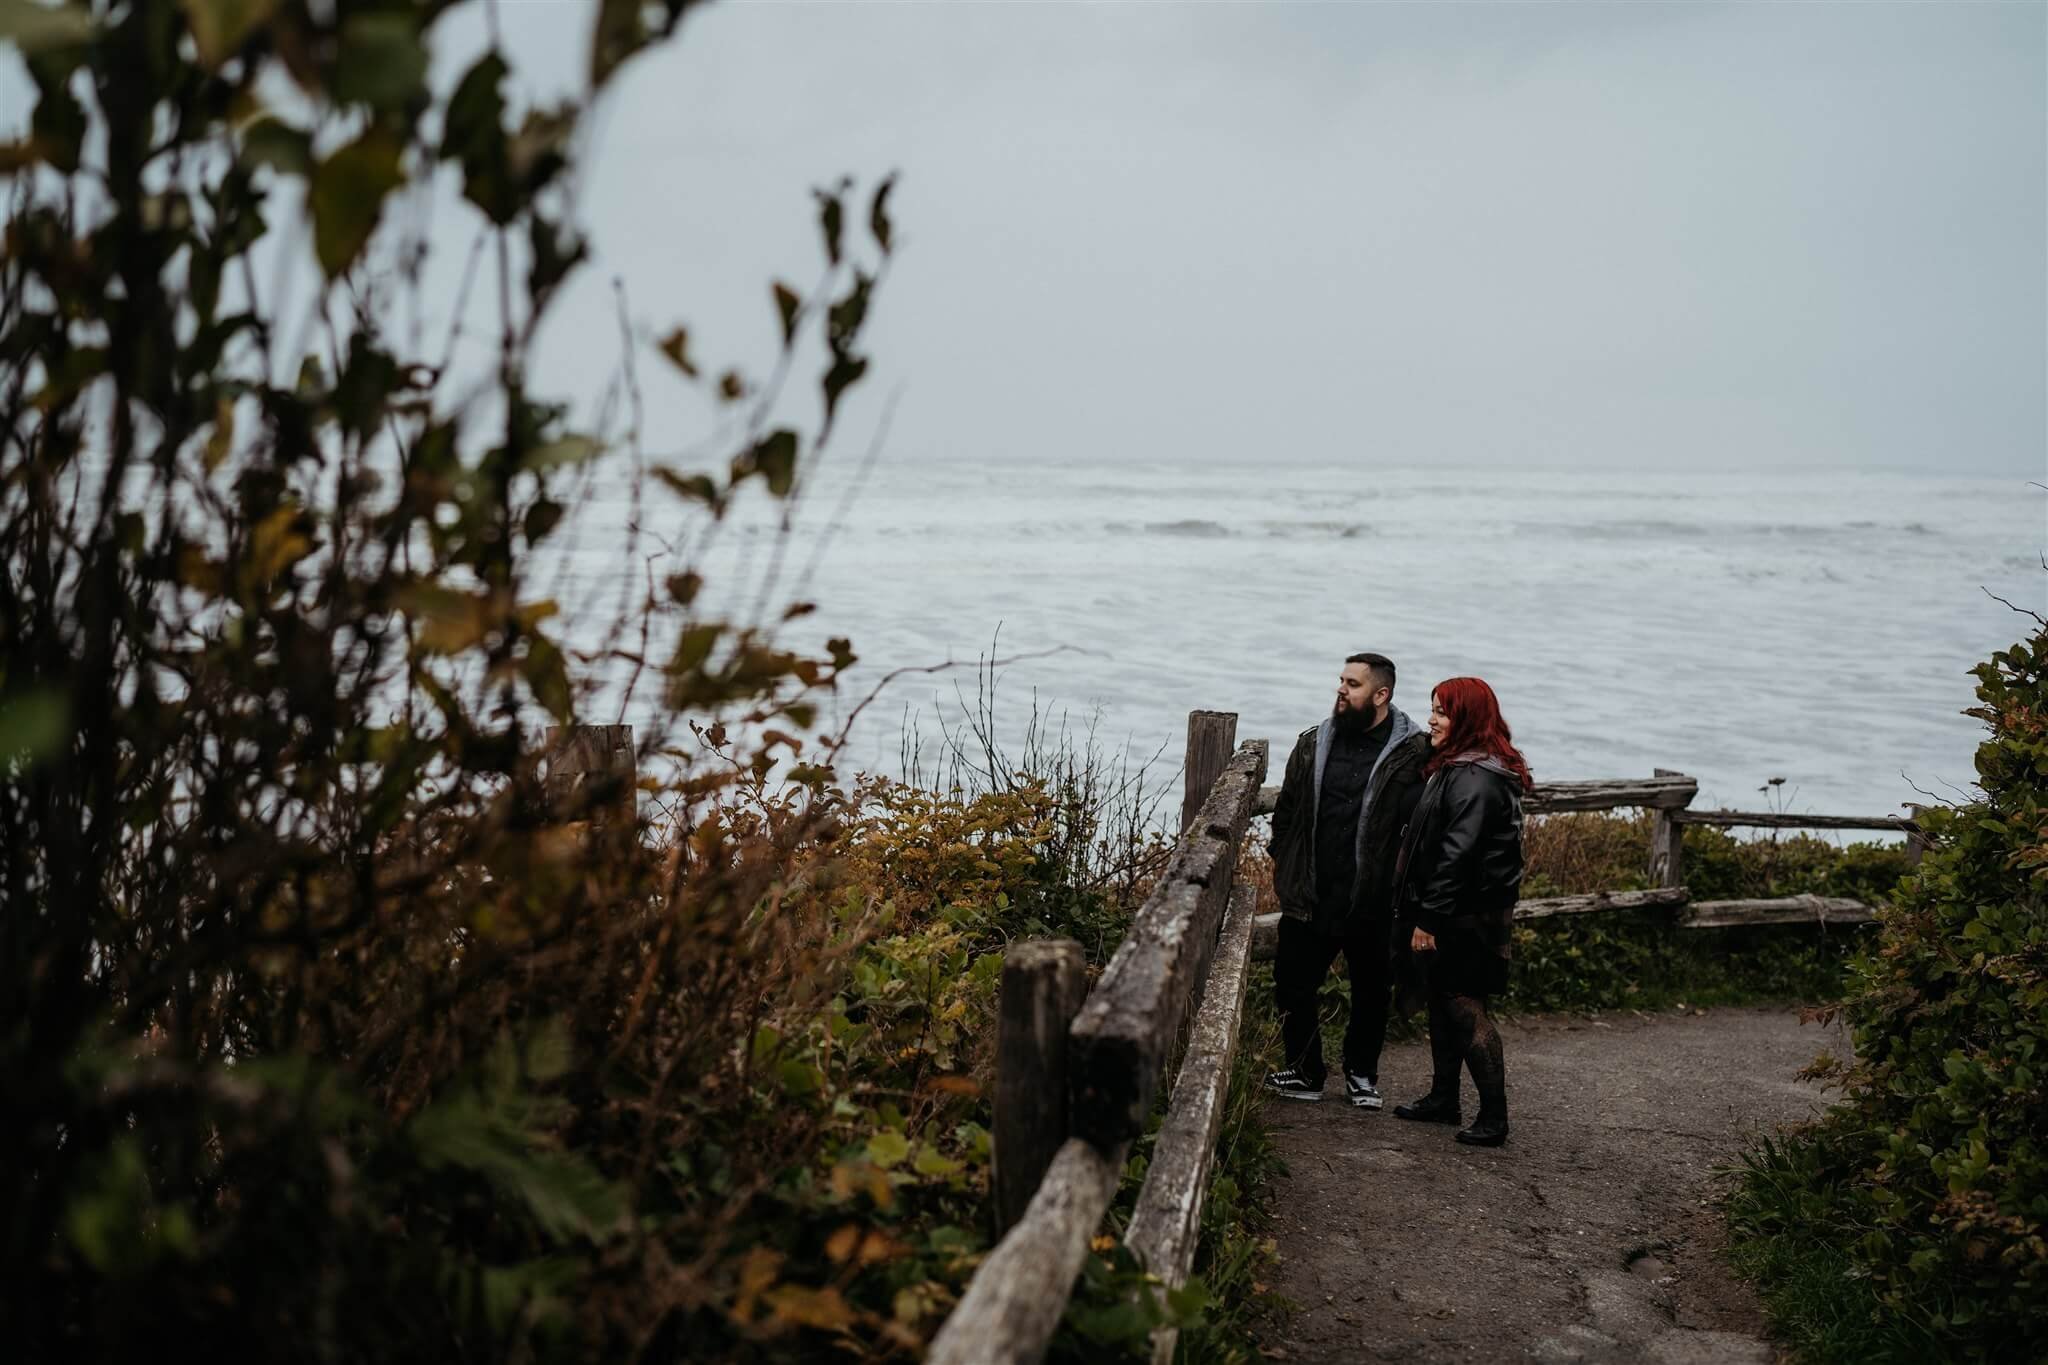 Couple photos at Ruby Beach in Olympic National Park